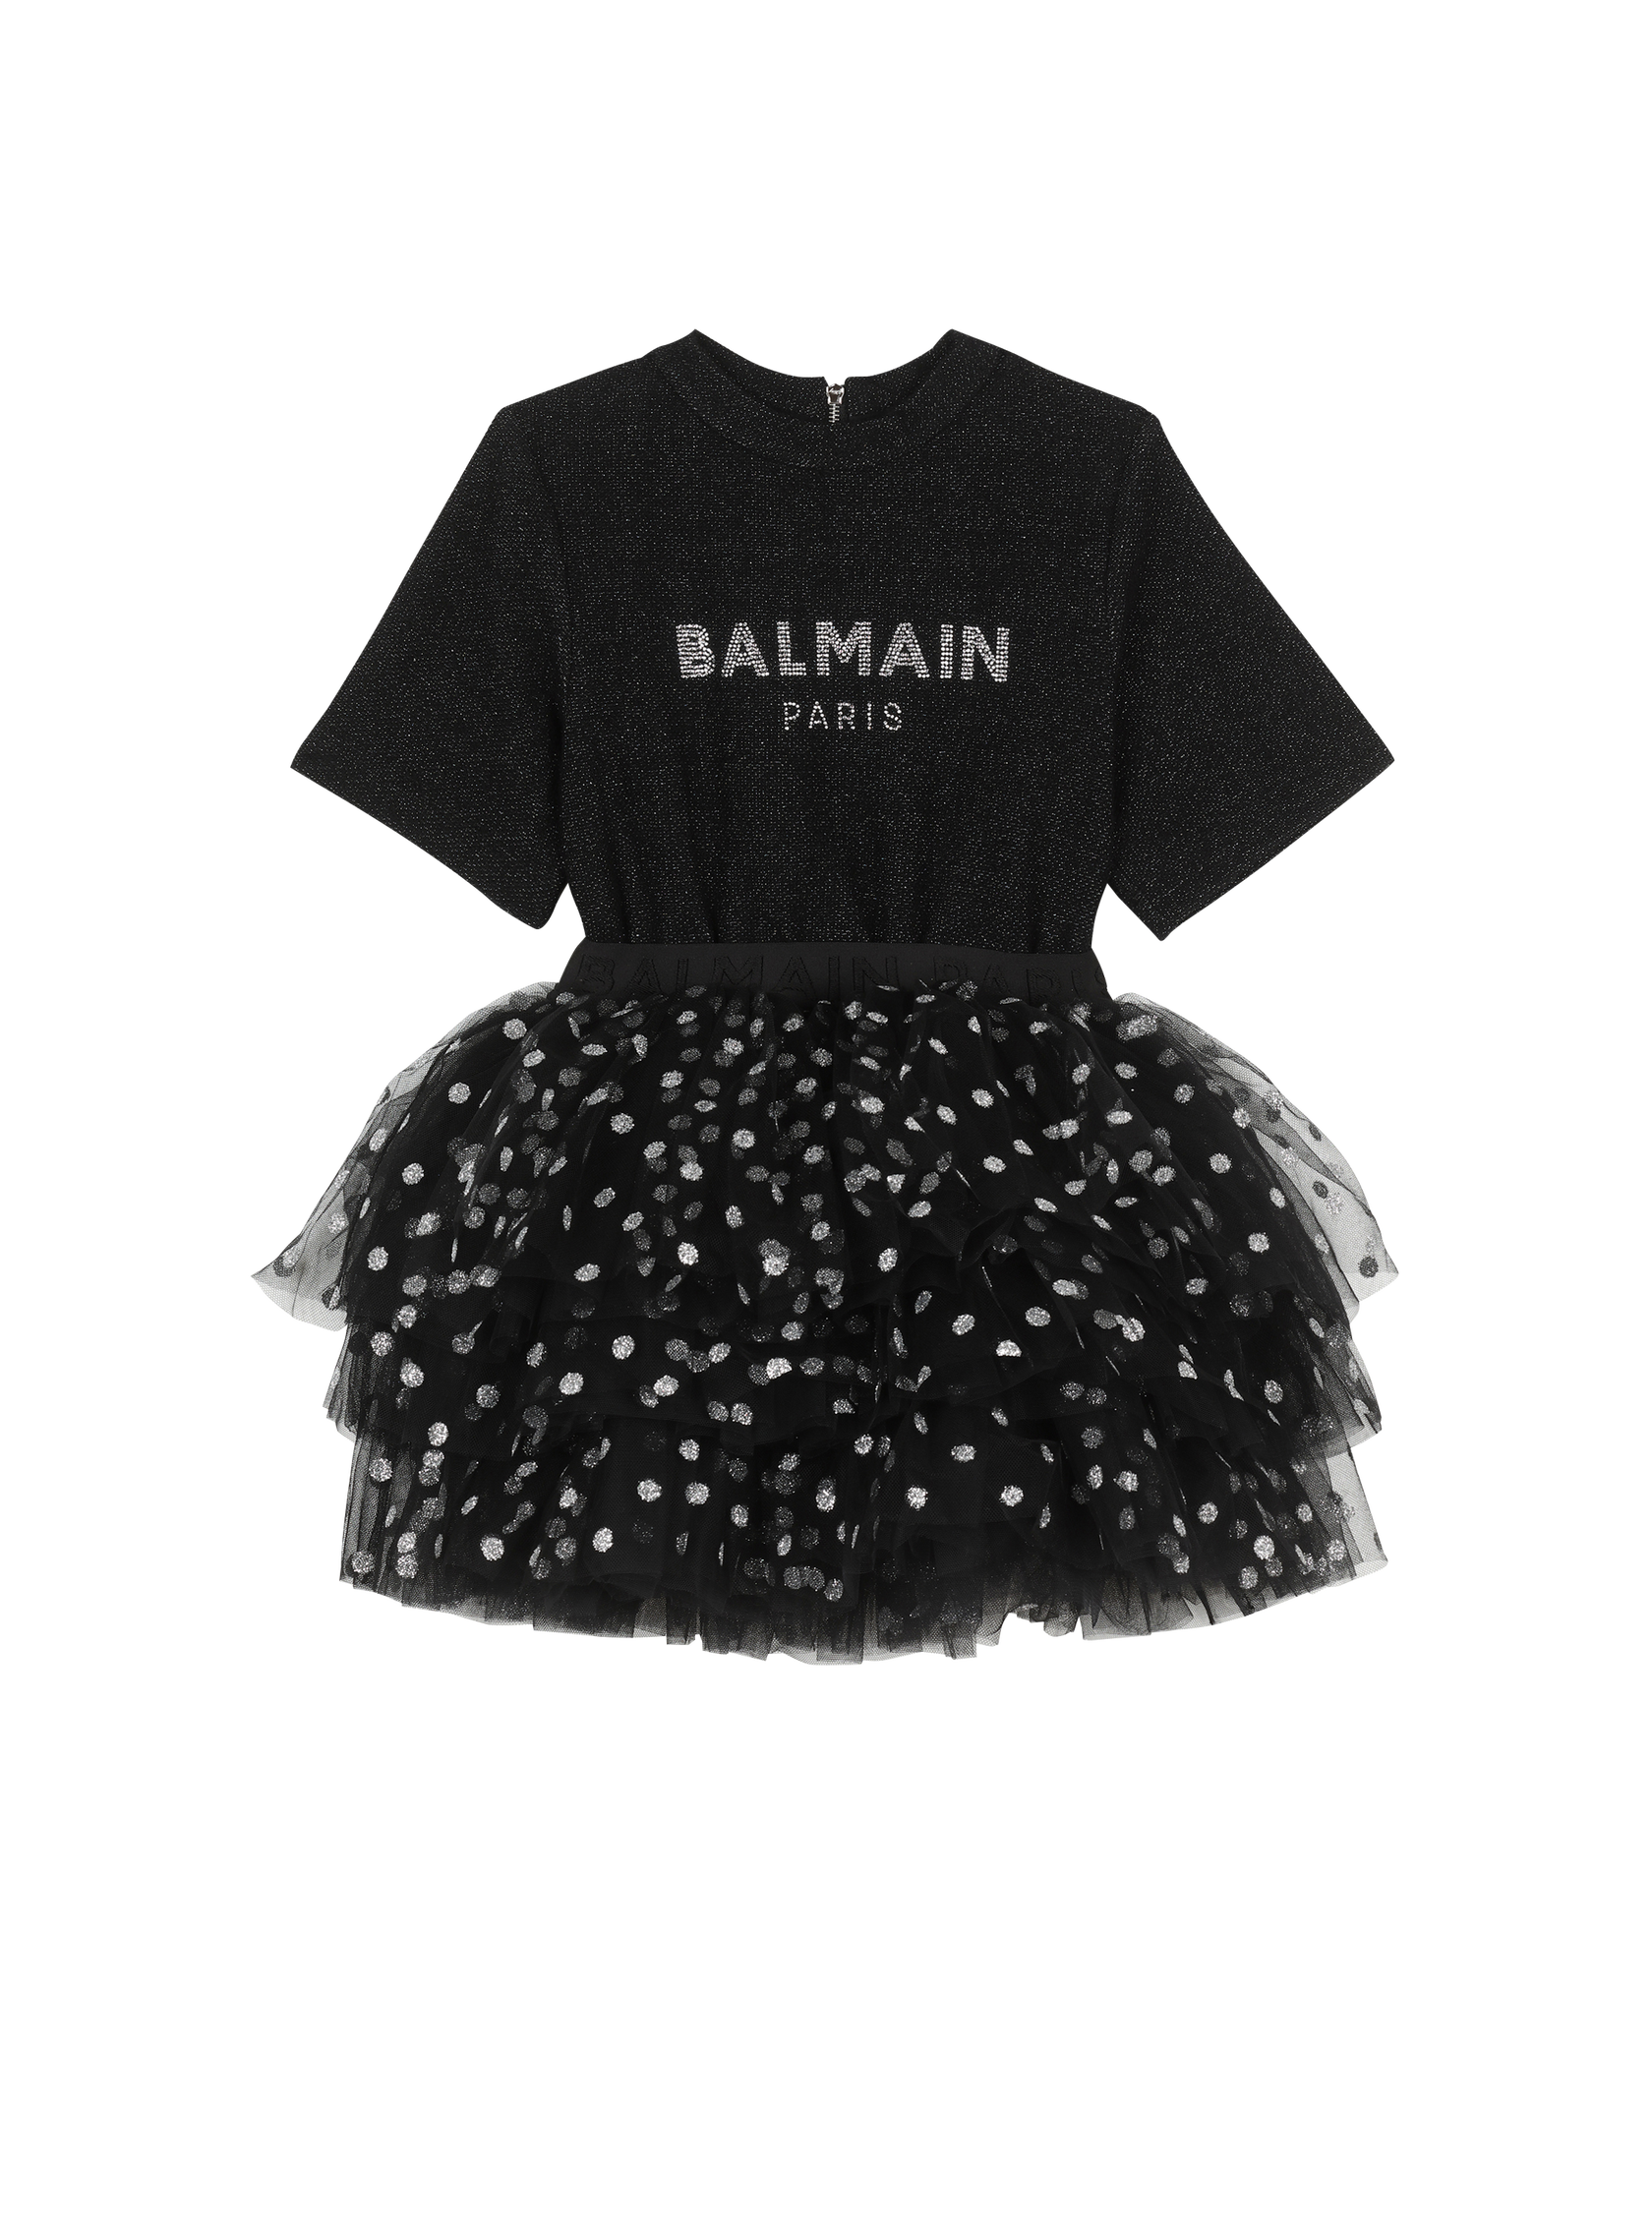 undefined | Cotton dress with Balmain logo